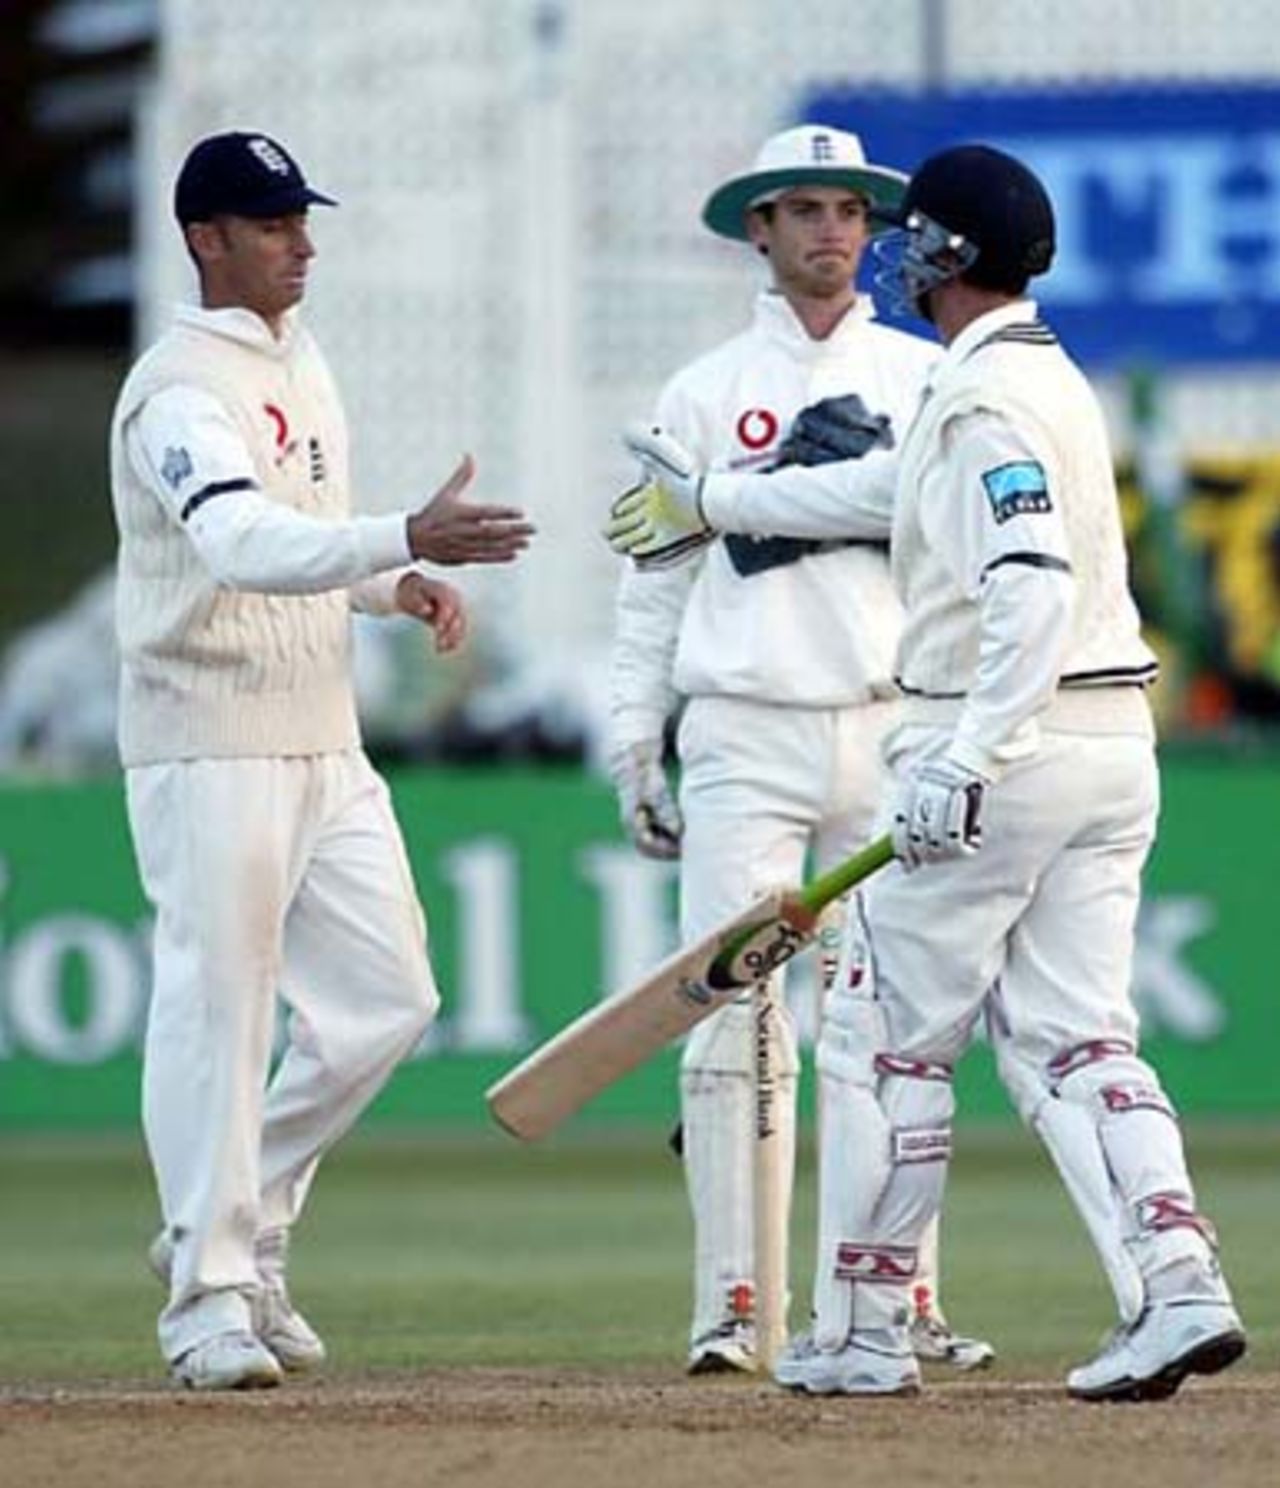 England captain Nasser Hussain and New Zealand batsman Astle shake hands at the end of the match while wicket-keeper James Foster looks on. 2nd Test: New Zealand v England at Basin Reserve, Wellington, 21-25 March 2002 (25 March 2002).